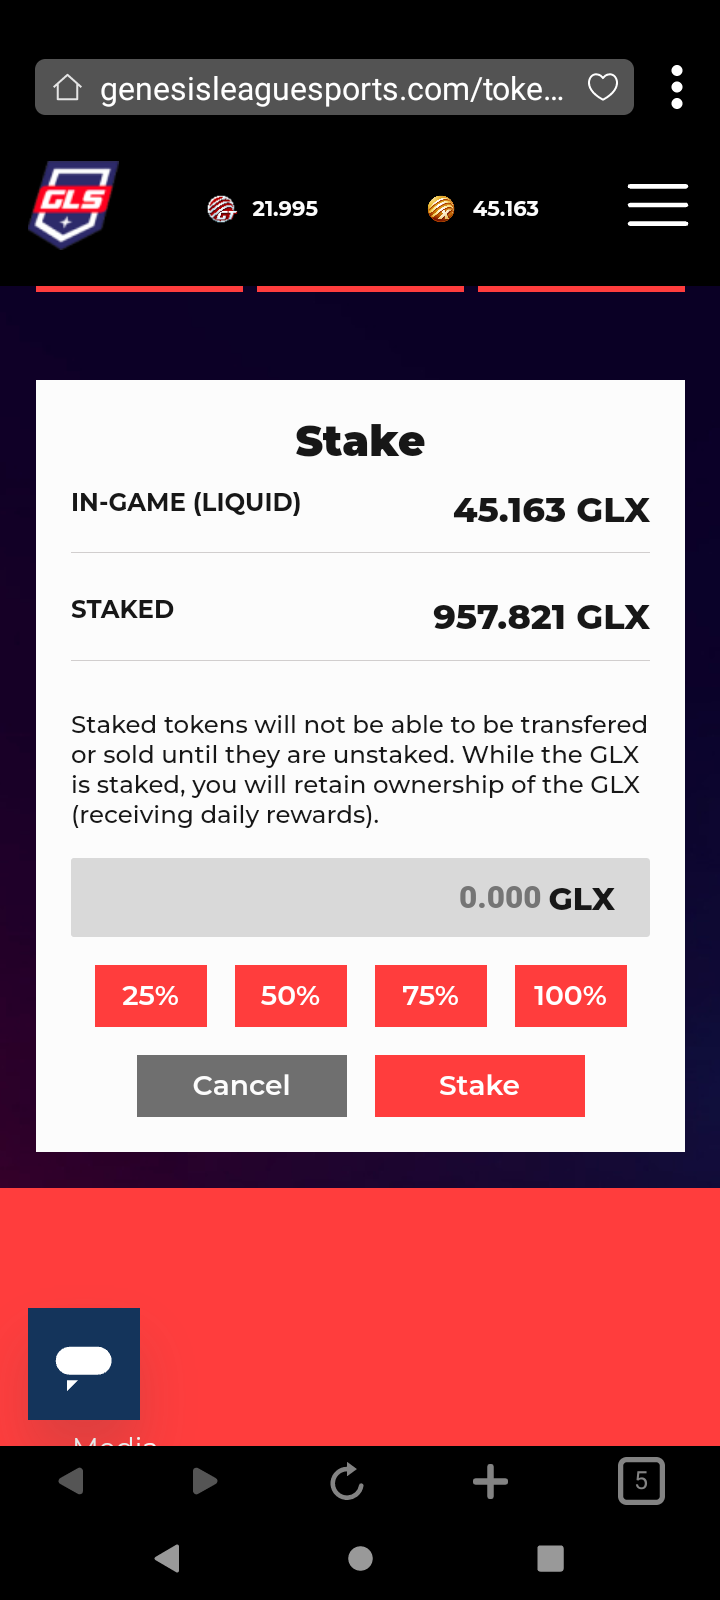 @galberto/glx-token-stake-or-not-stake-that-is-the-question